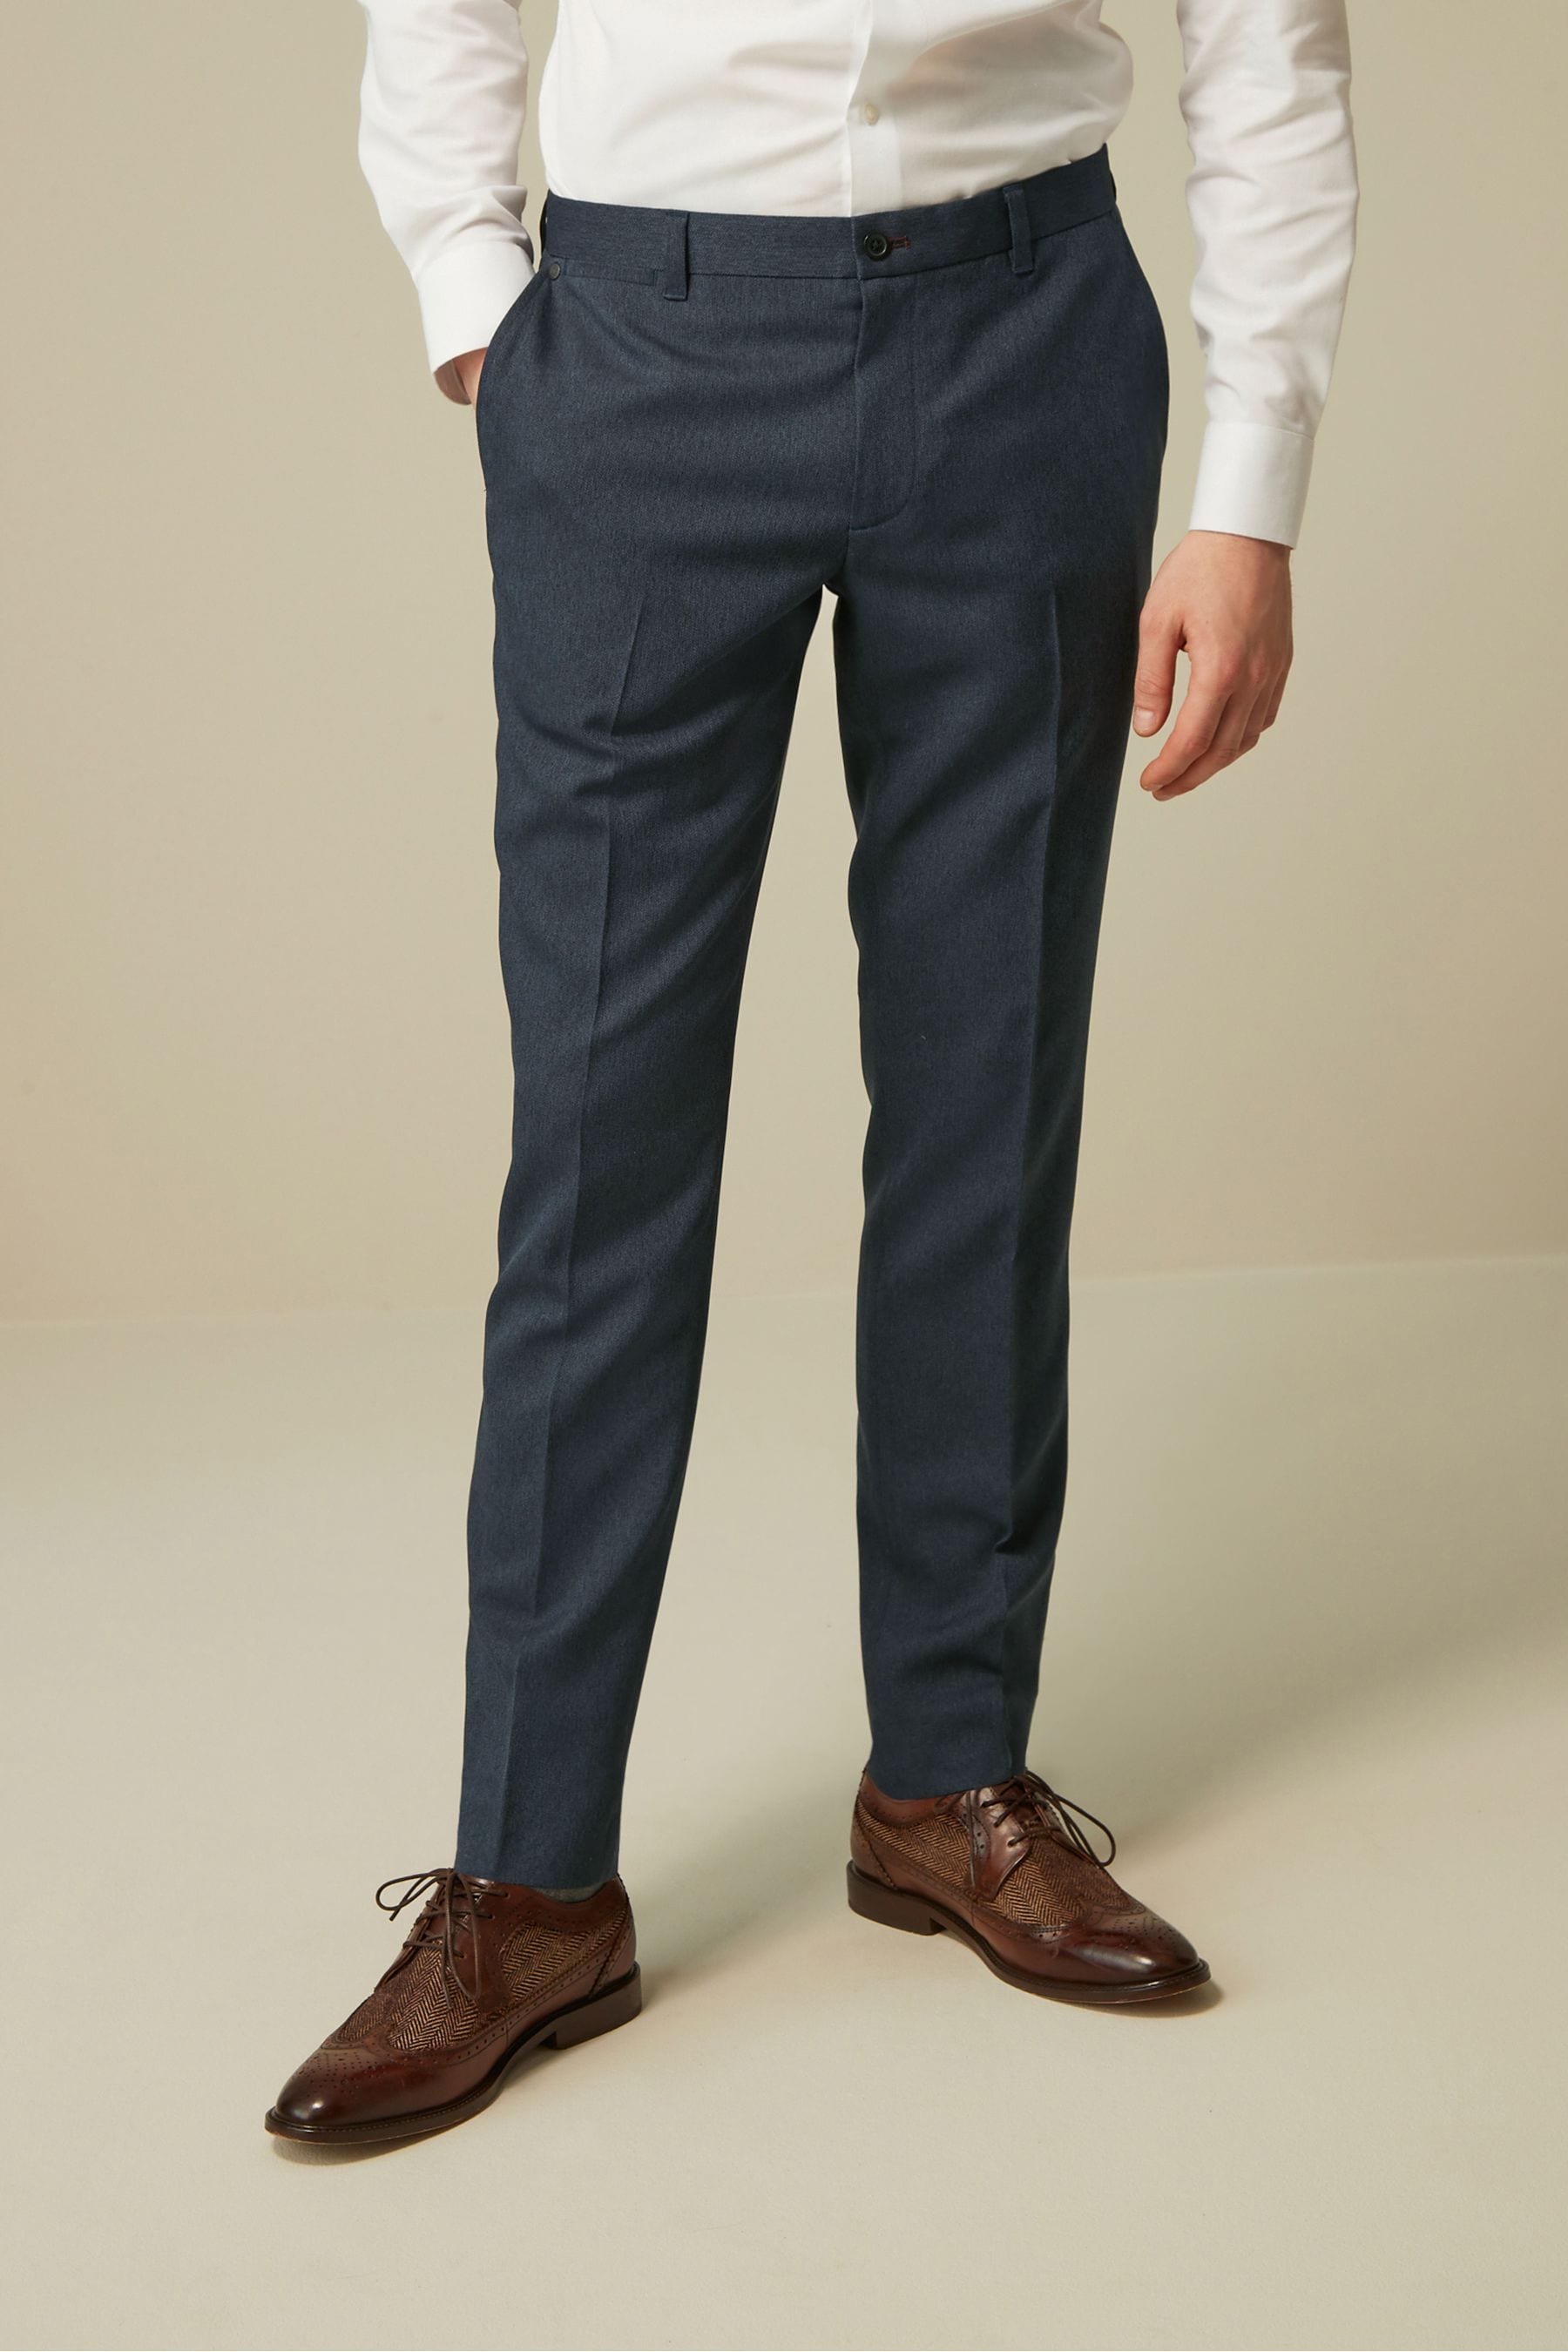 Buy Navy Blue Slim Trimmed Herringbone Textured Trousers from the Next ...